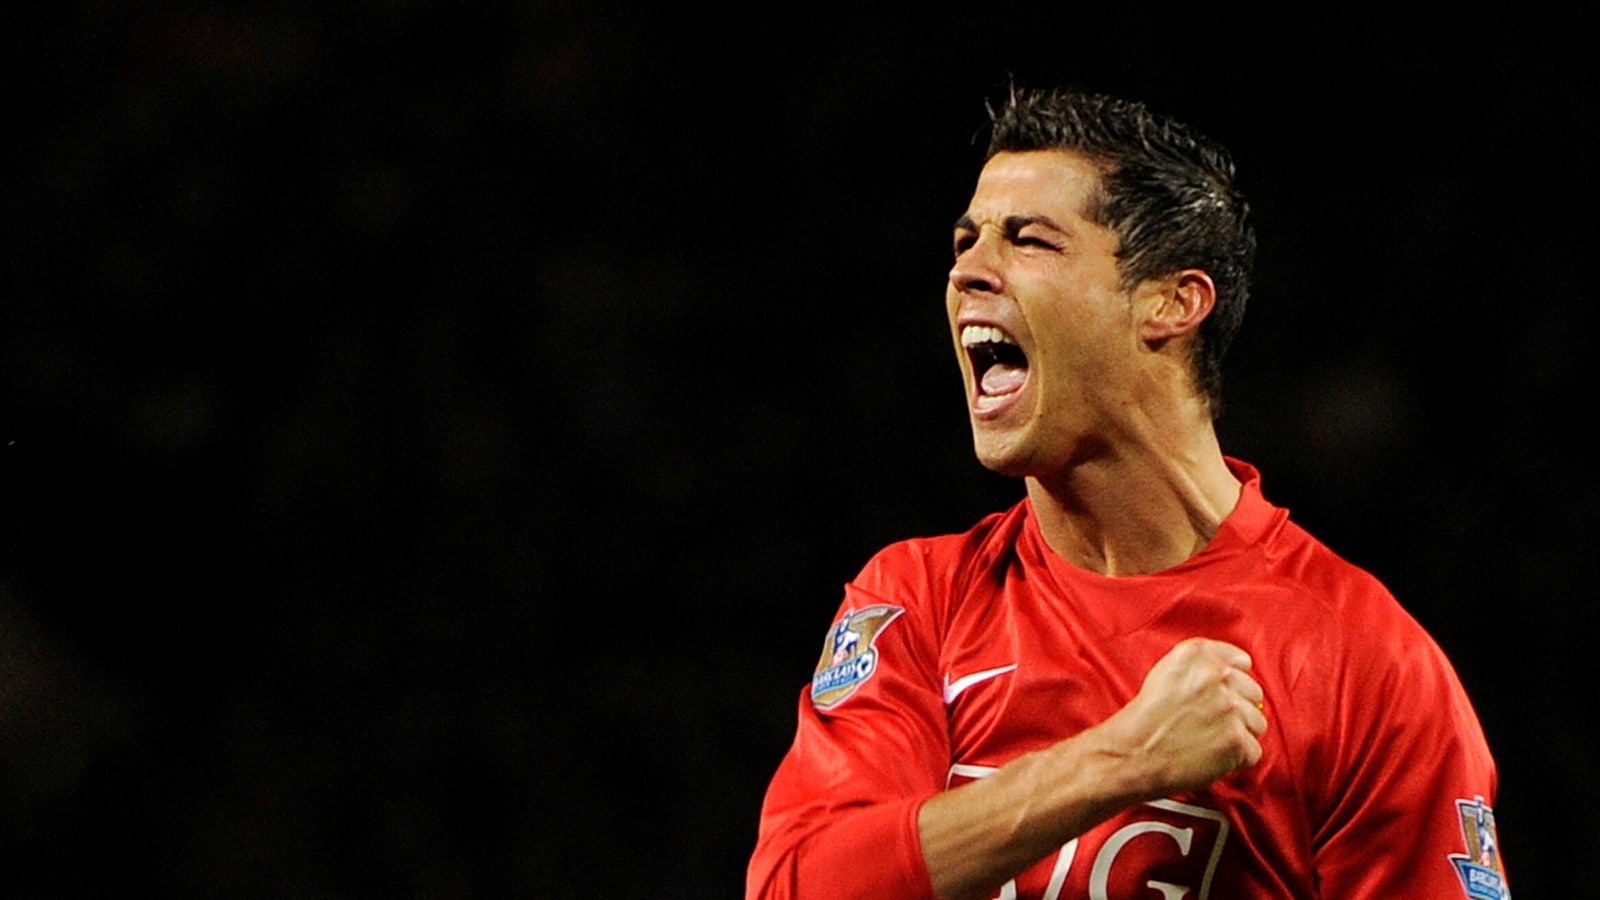 Manchester United says it has reached an agreement with Juventus for the transfer of Cristiano Ronaldo